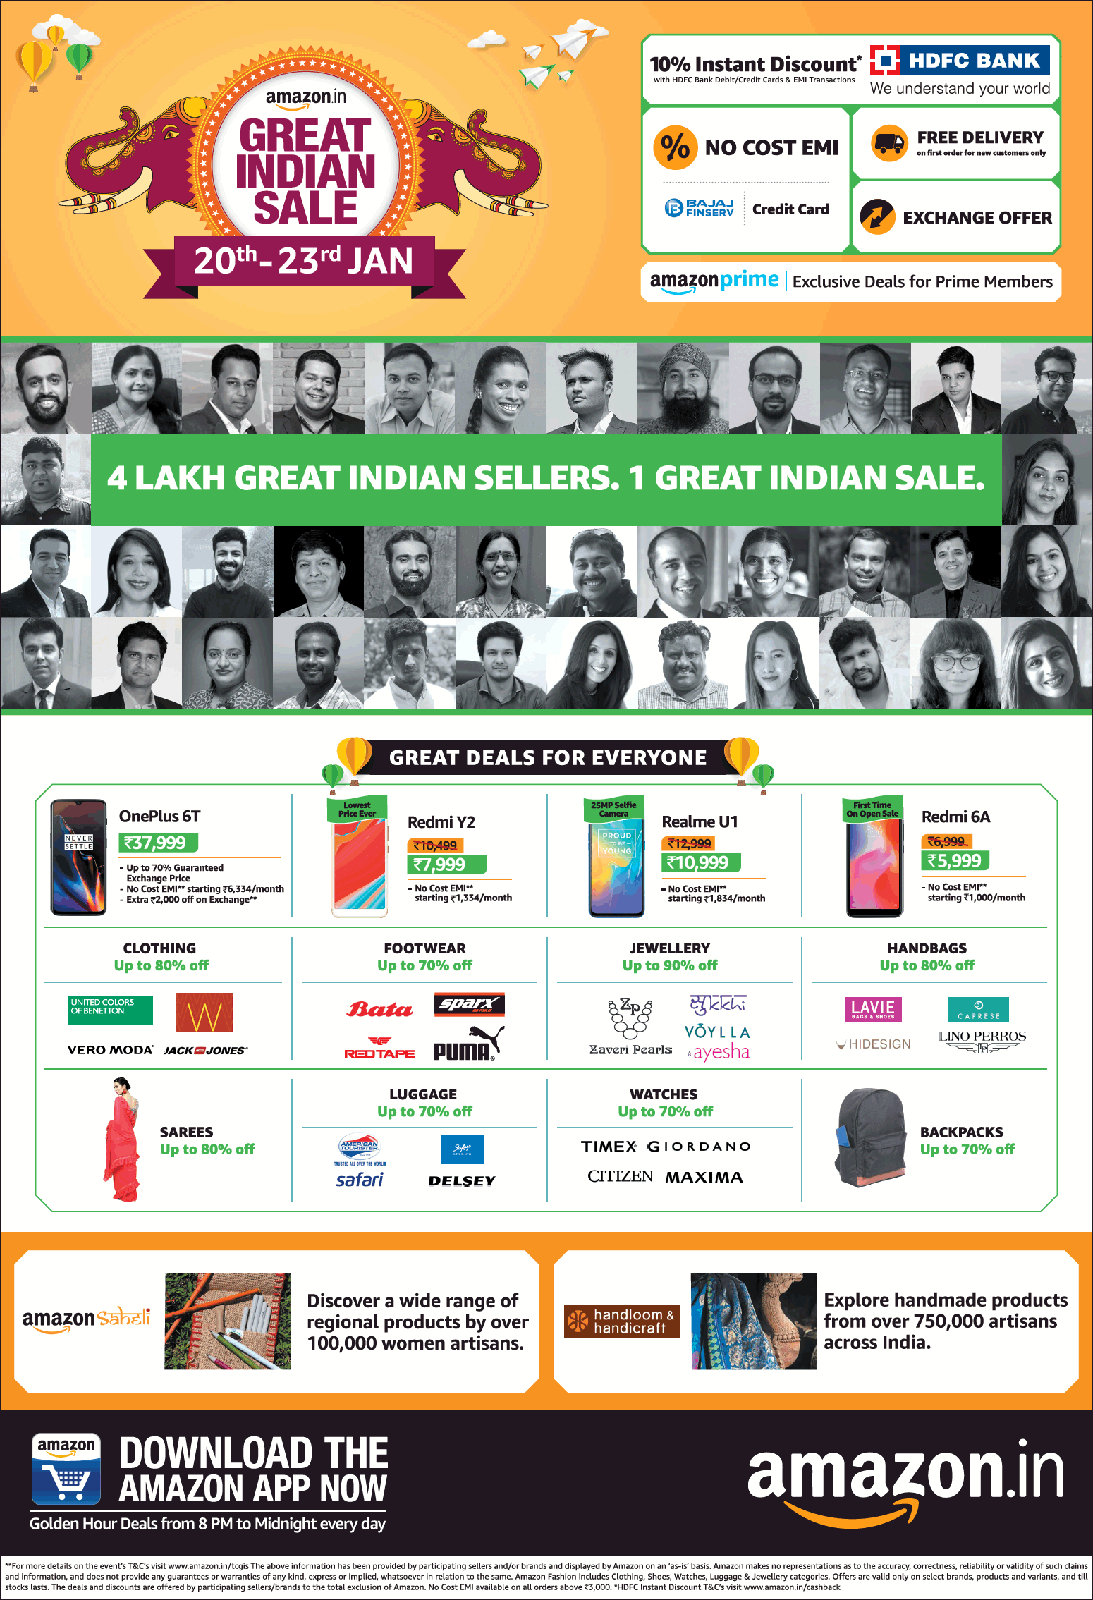 amazon-in-great-india-sale-20th-to-23rd-january-ad-times-of-india-mumbai-20-01-2019.png